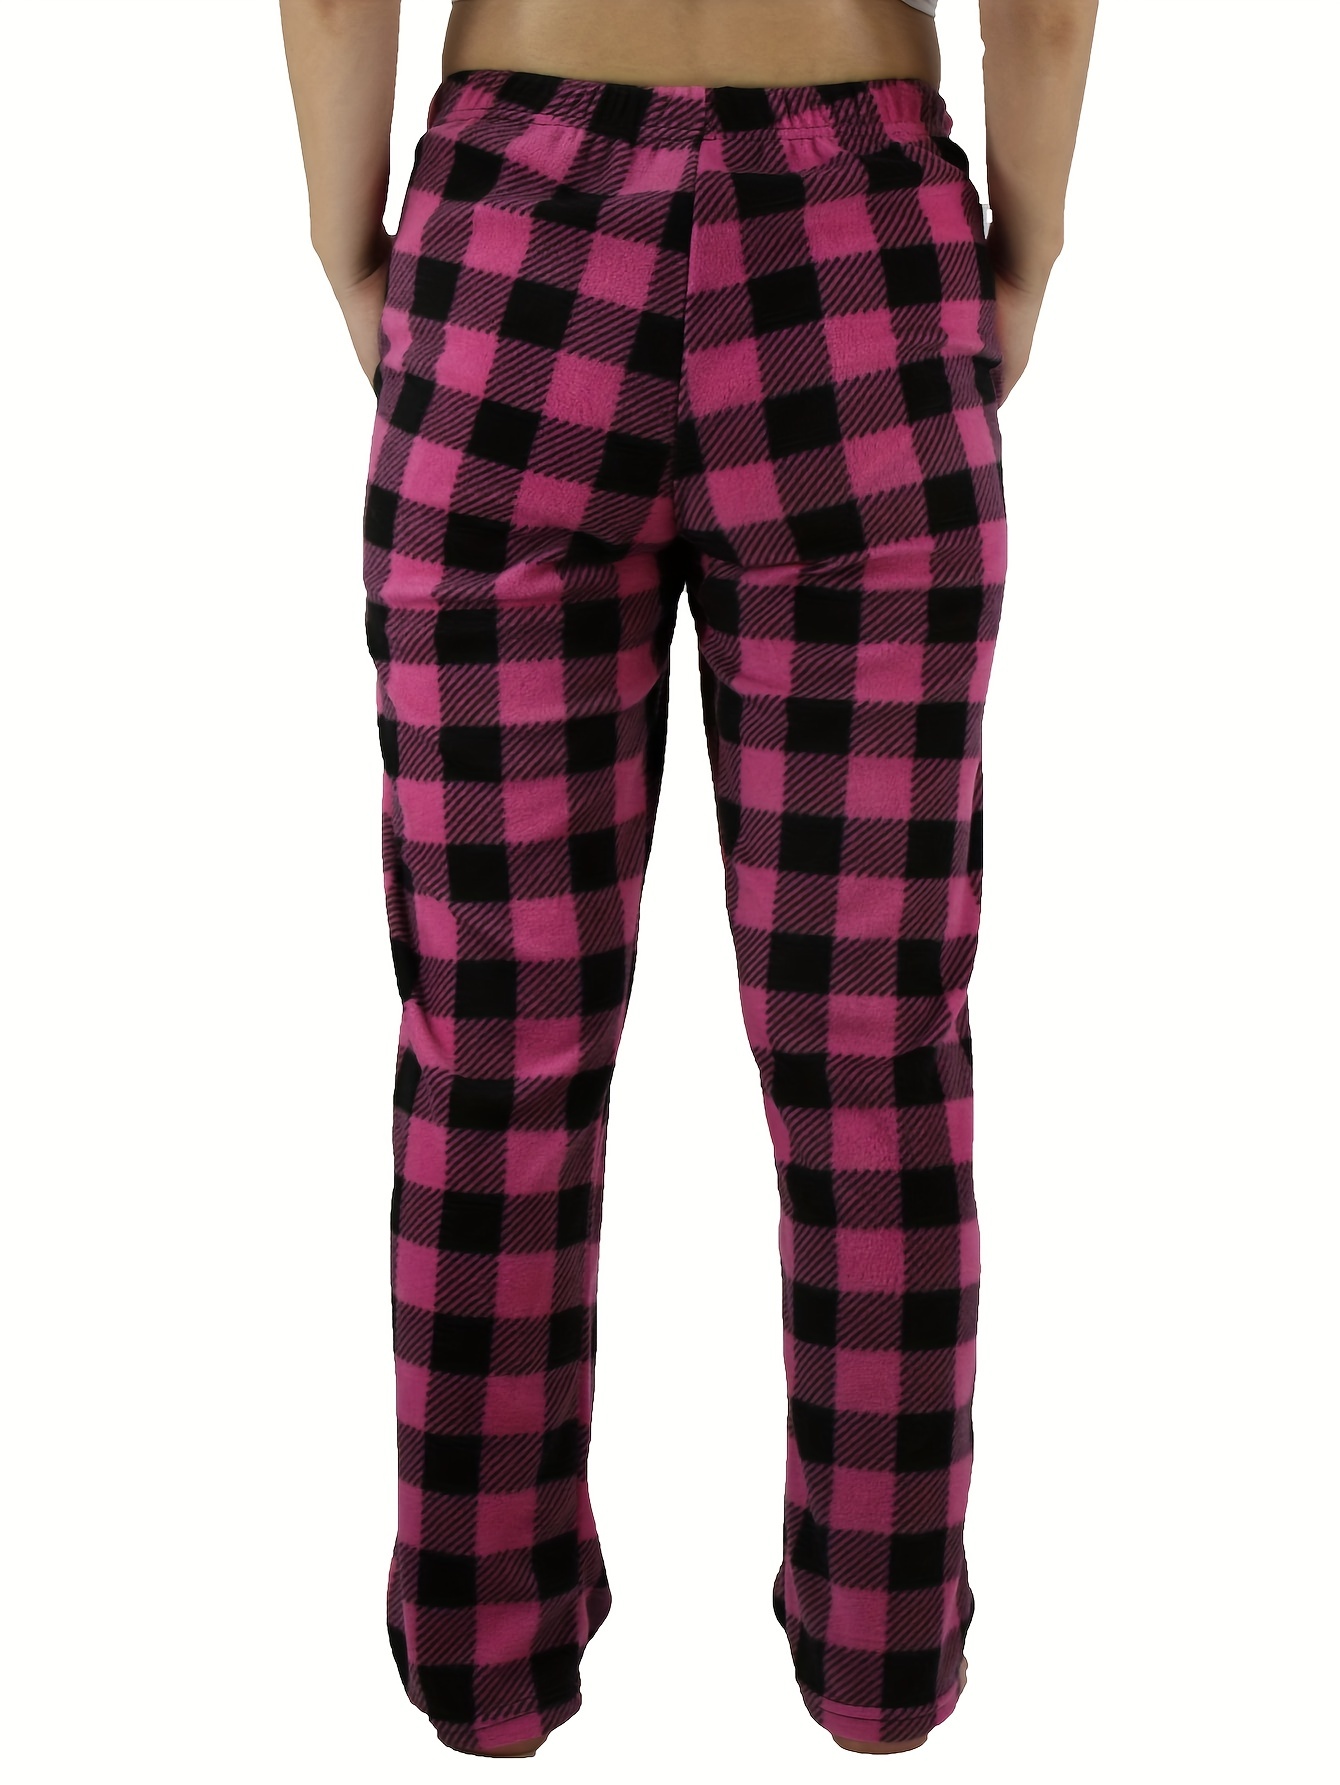 Comfy Lifestyle Women’s Plaid Pajama Pants, Soft and Lightweight Drawstring  Lounge Bottoms with Elastic Waistband, Turquoise Pink FL09, Small